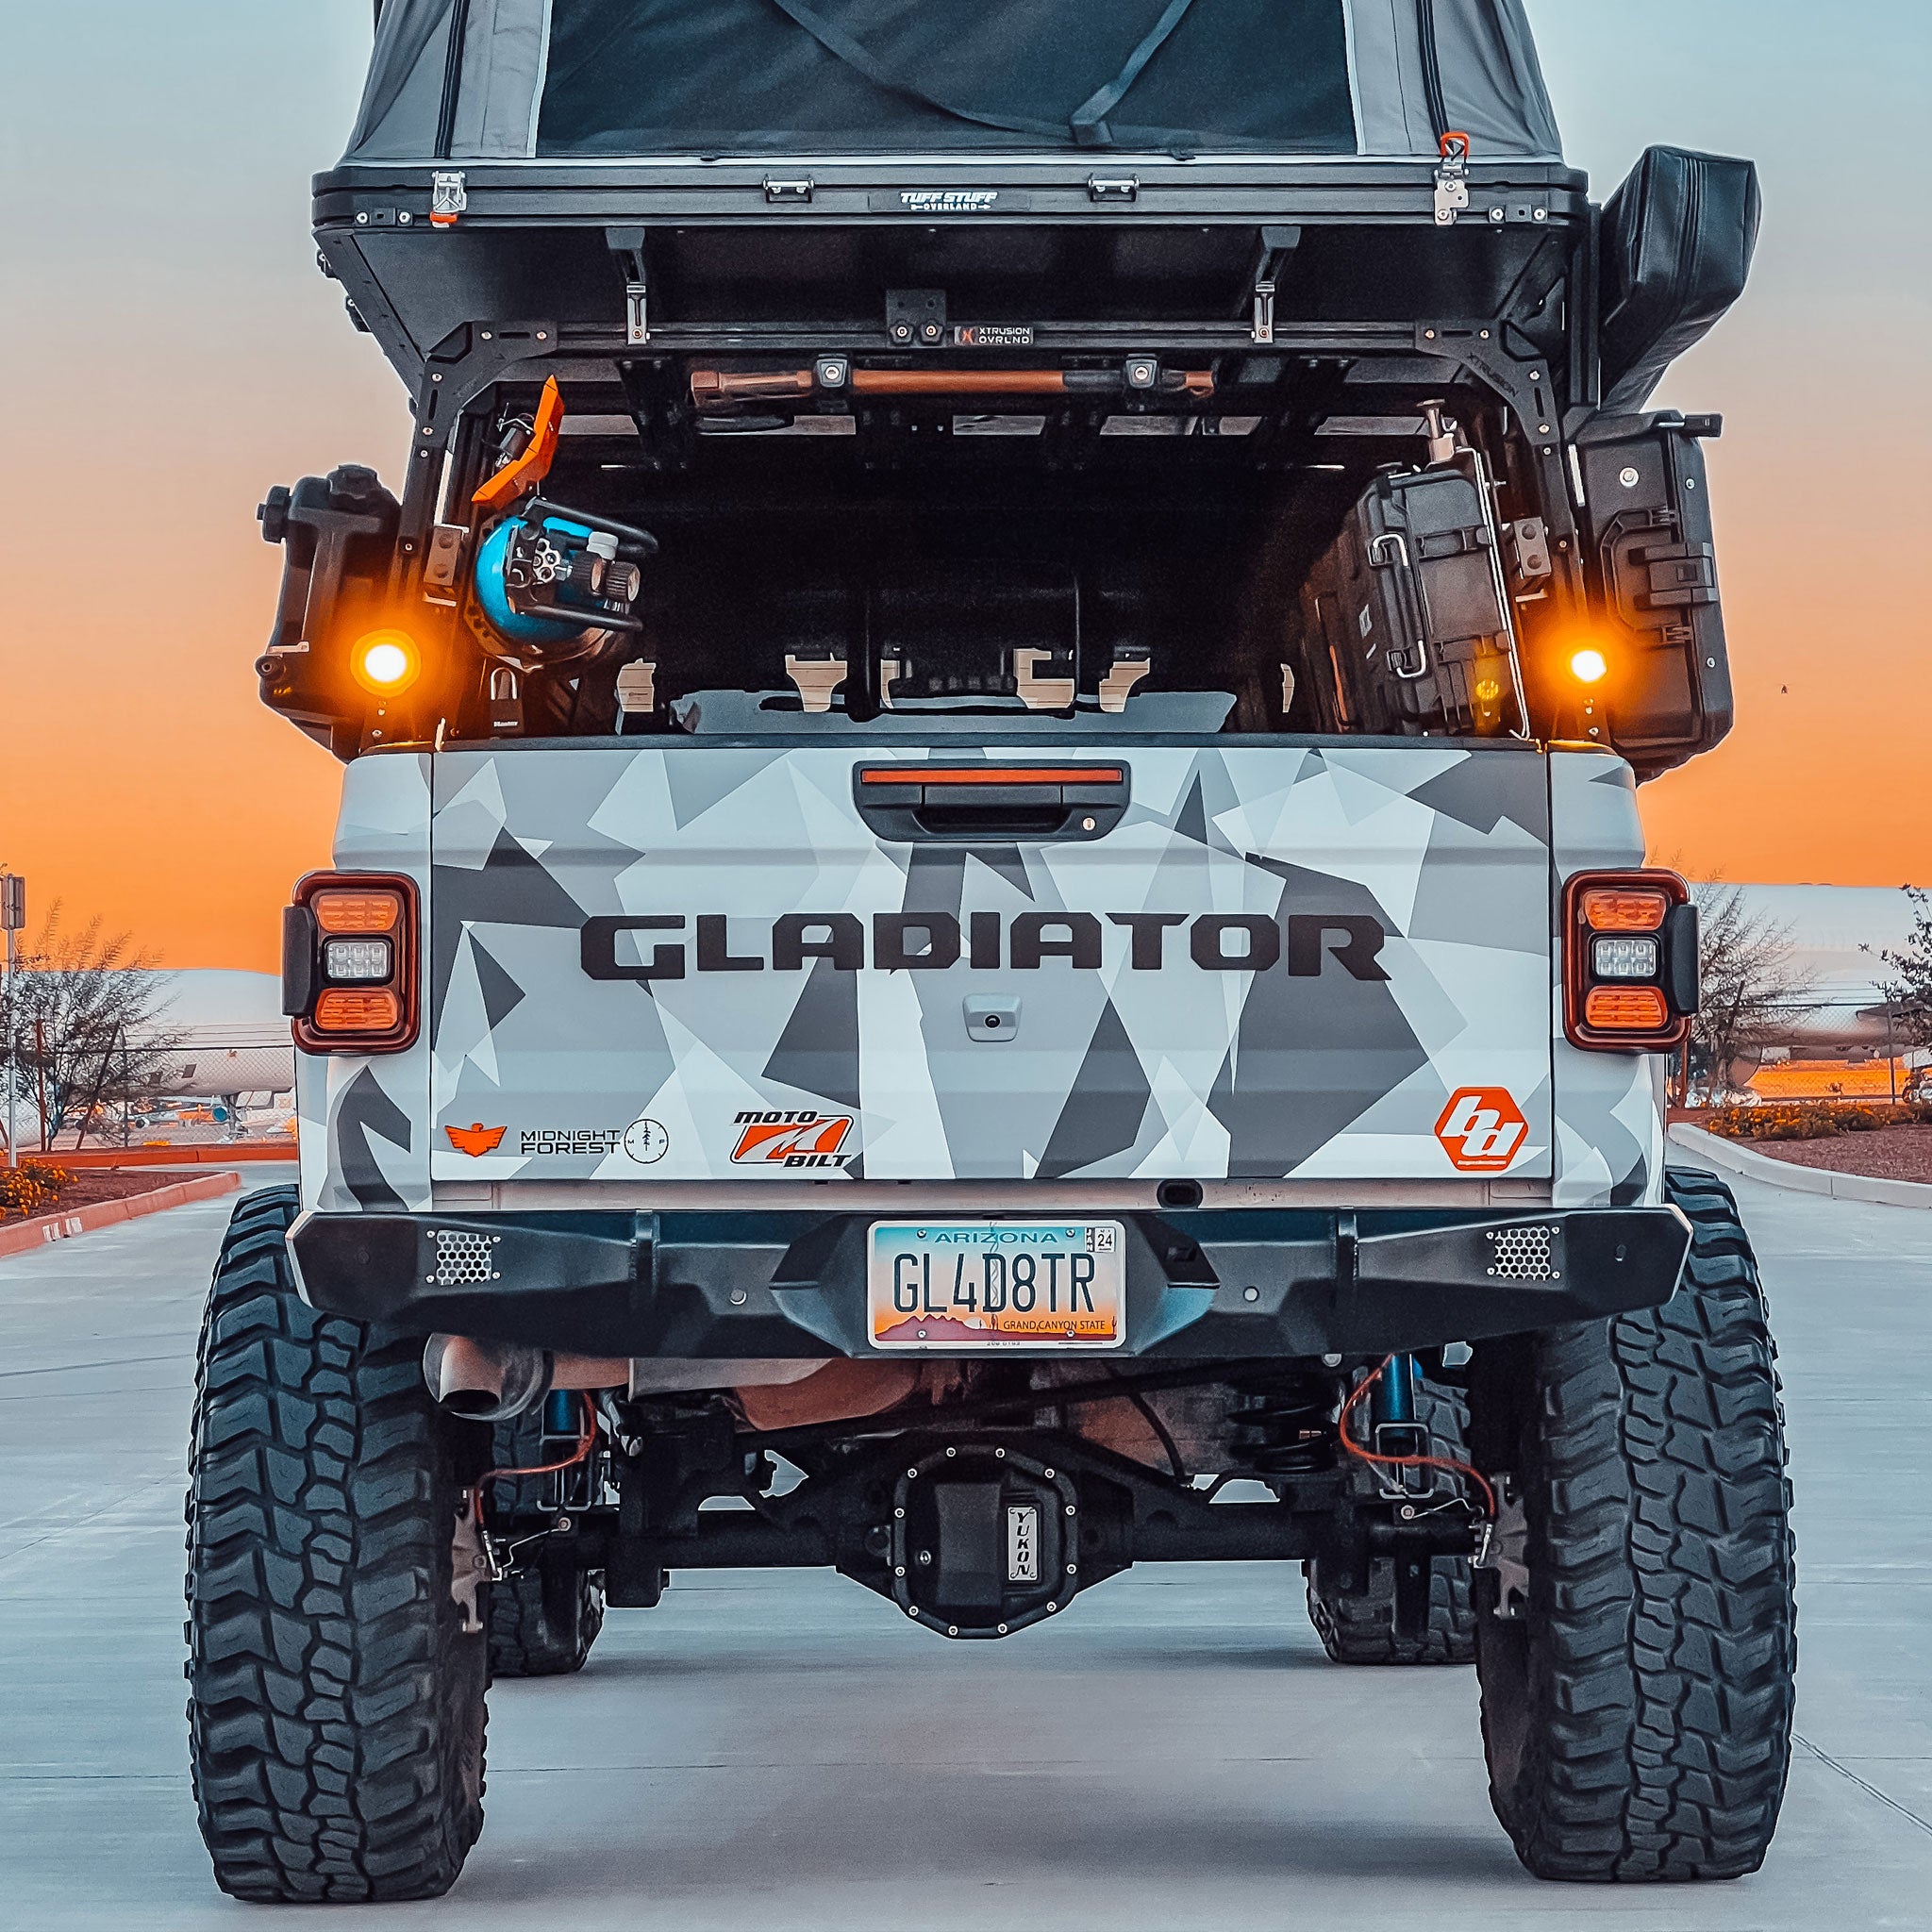 Image of back side of built Jeep Gladiator with 9 Degree XTR3 - 22 inch high bed rack, open roof top tent, awning, storage cases, shovel, Power Tank, and off-road gear.